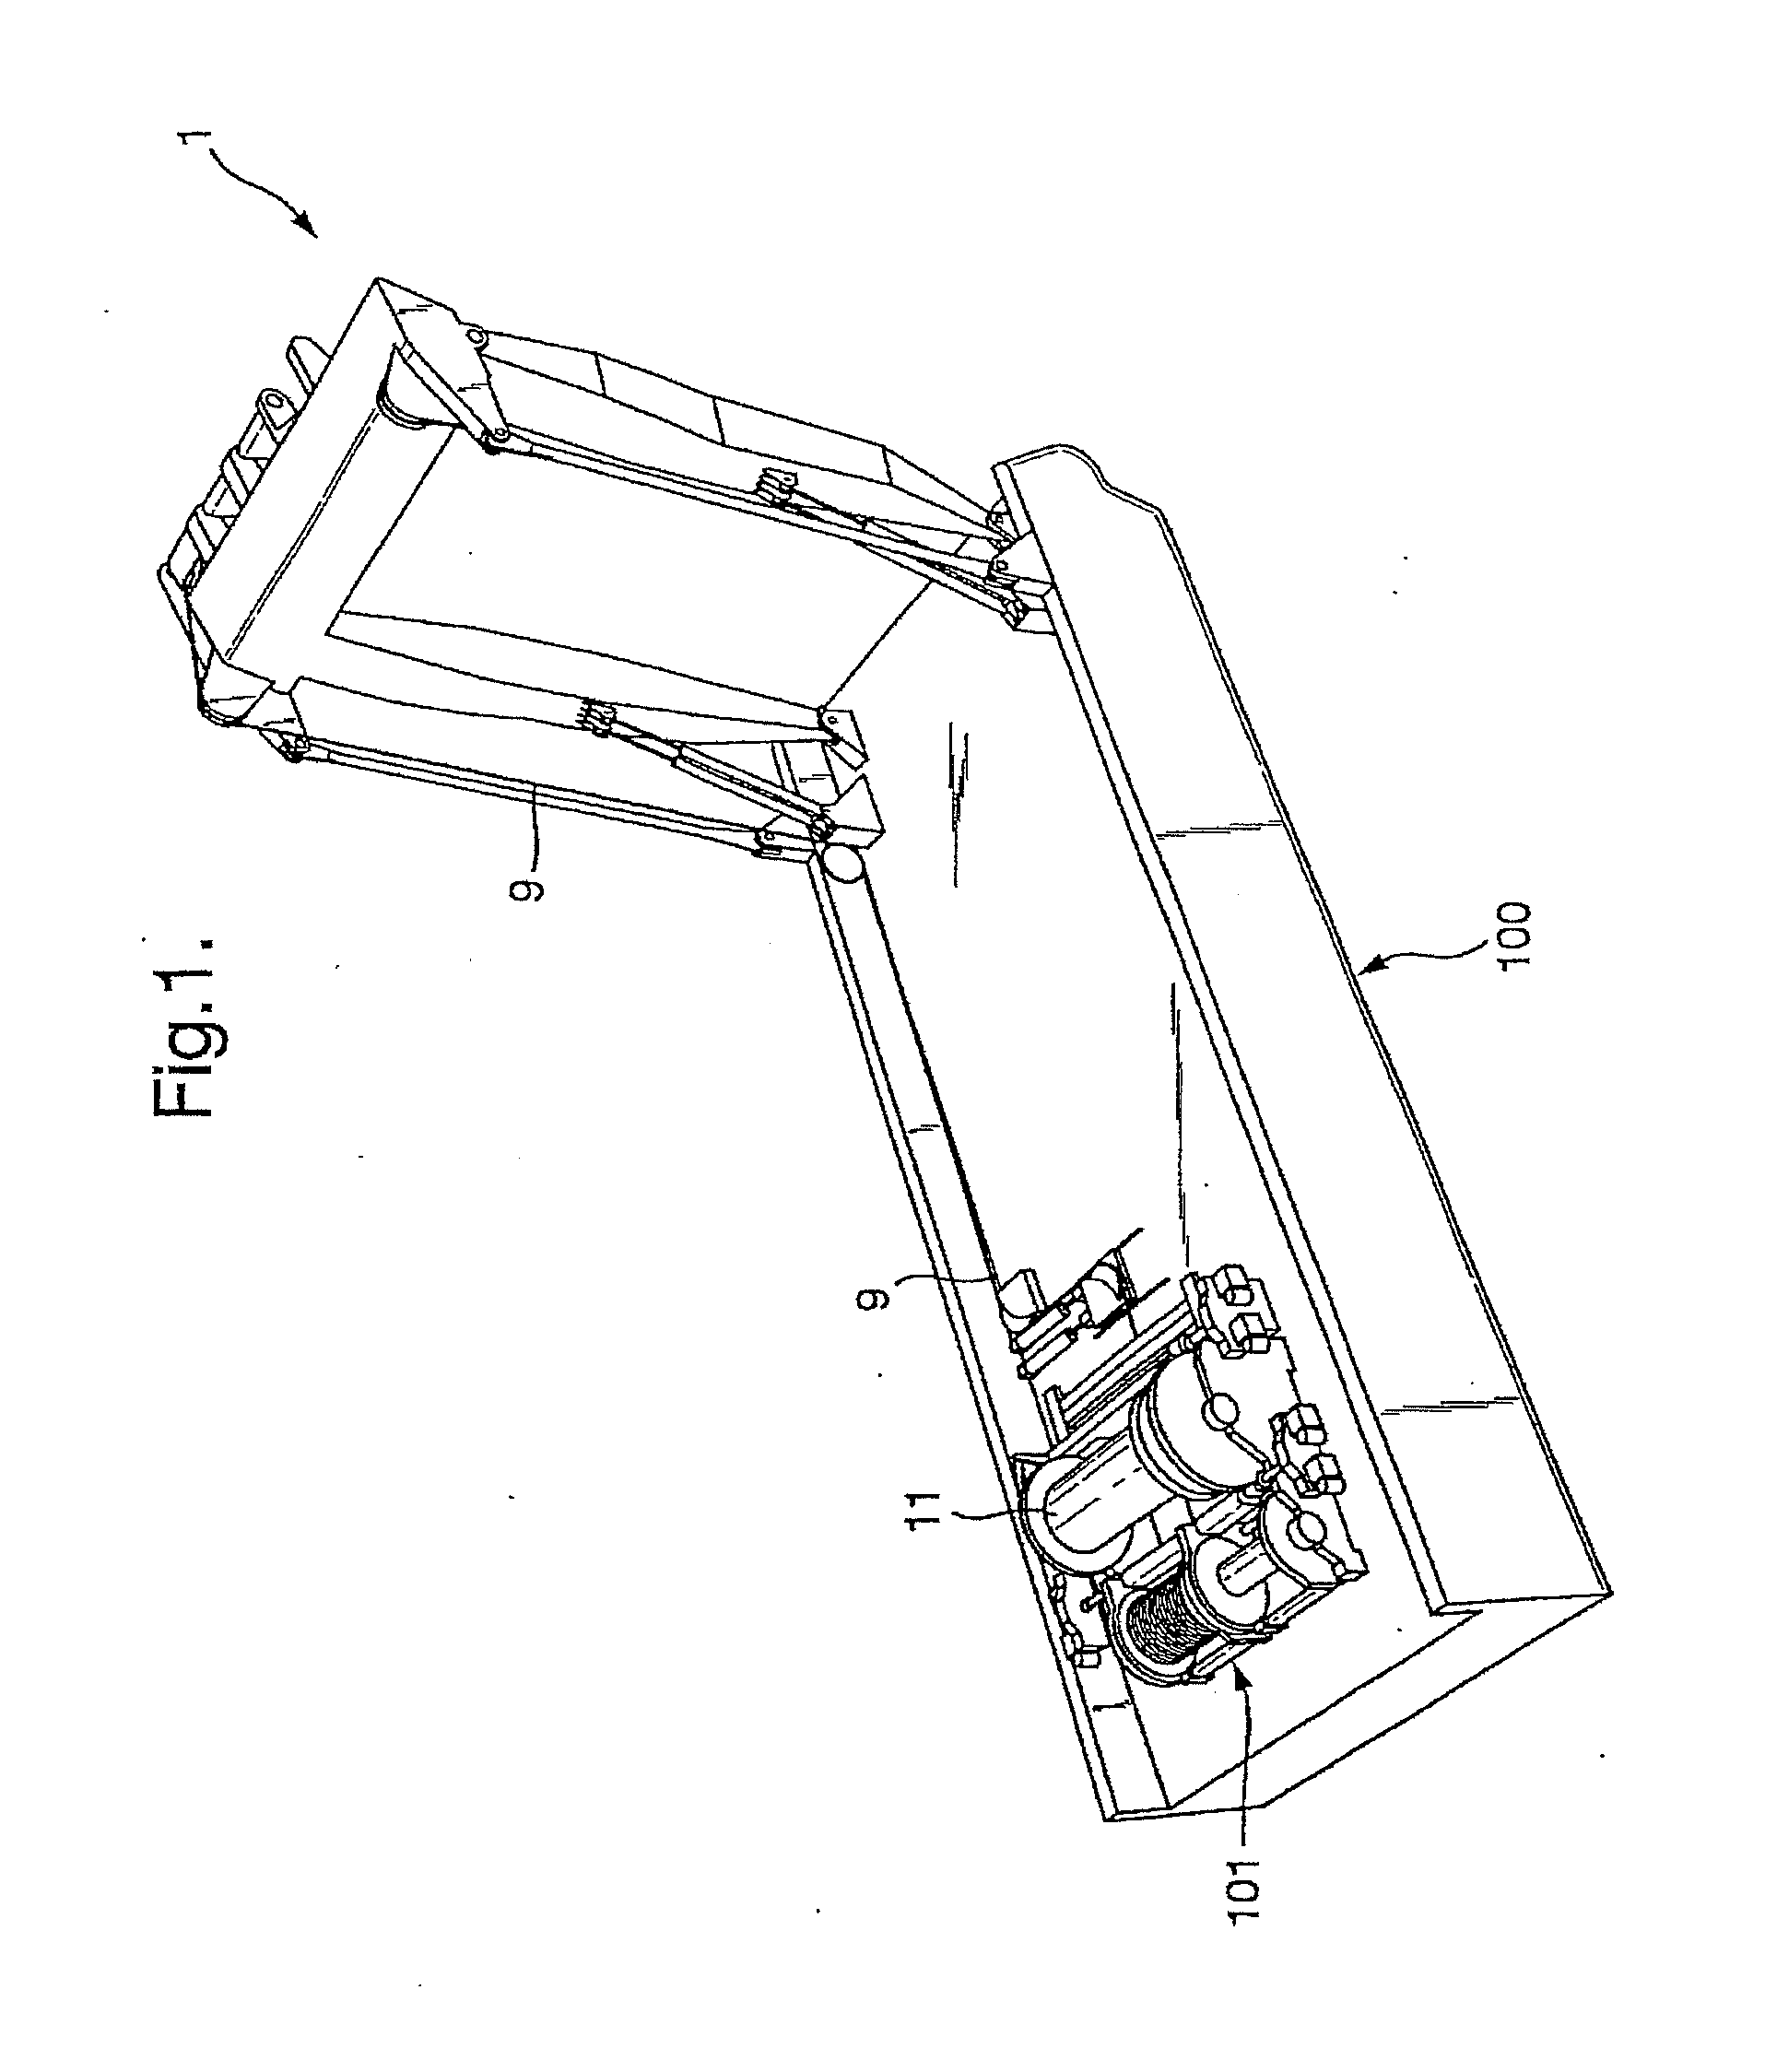 Lifting frame device